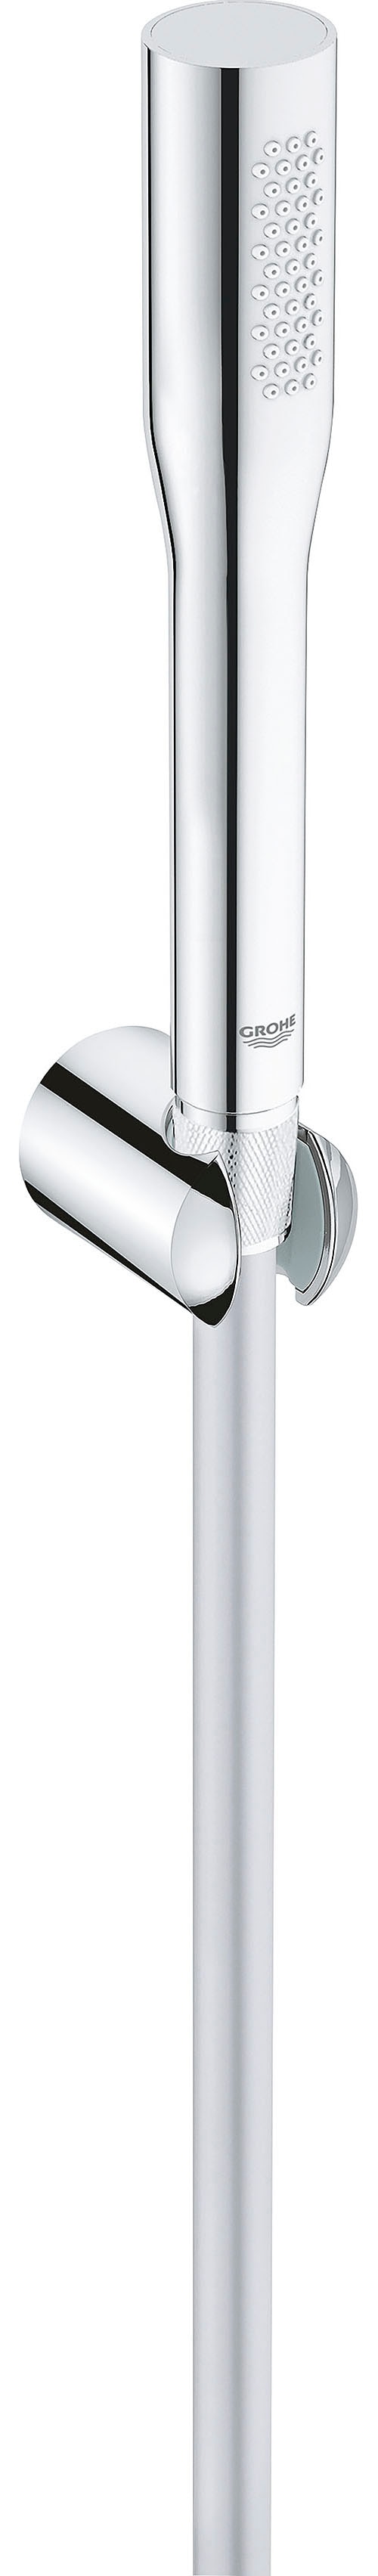 Grohe Duschbrause "Vitalio Get"